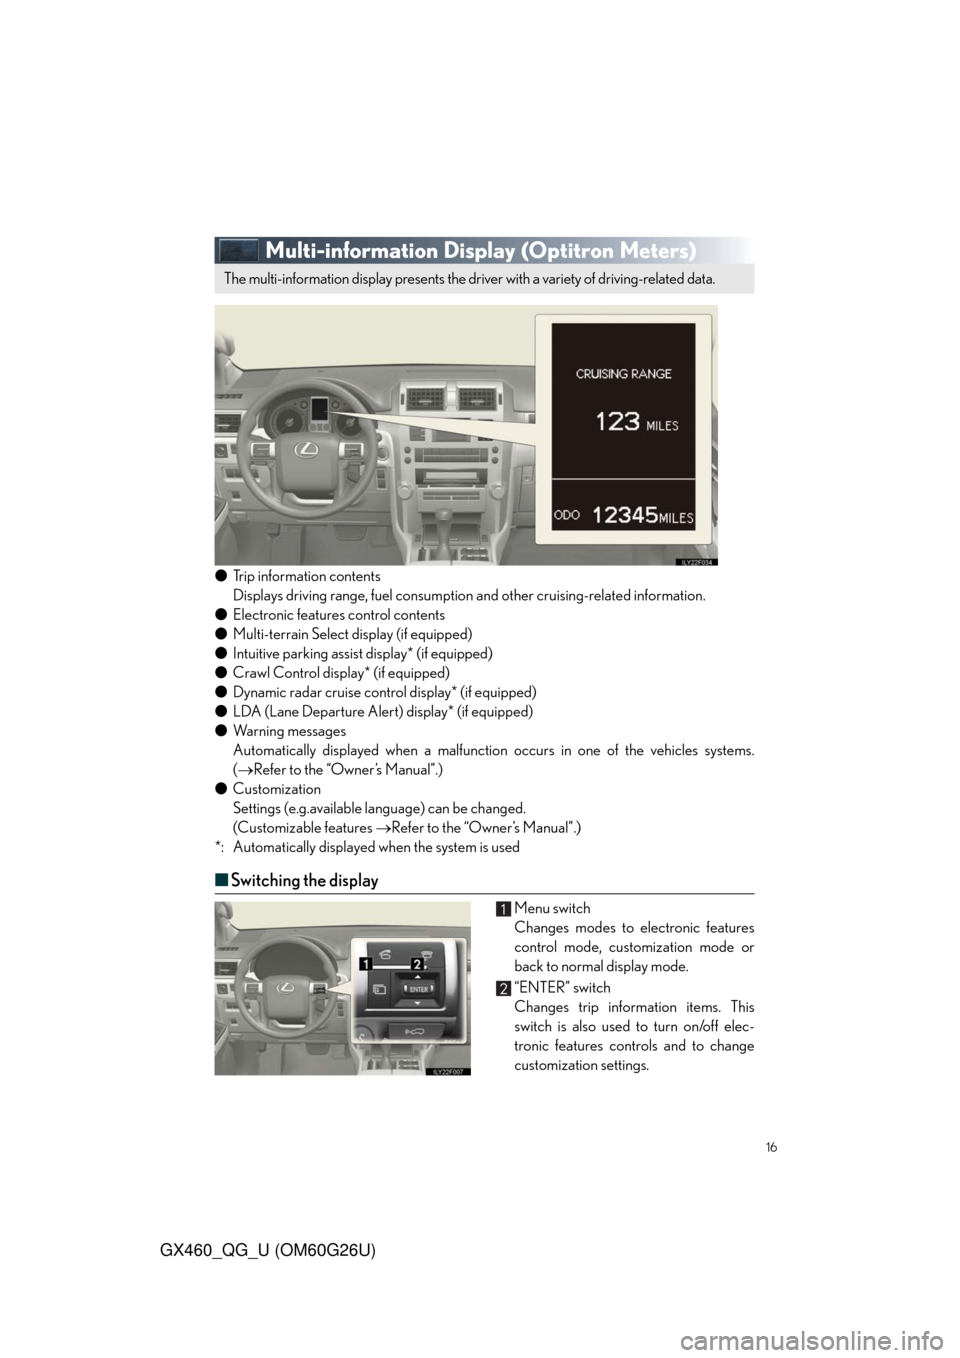 Lexus GX460 2011  Intuitive Parking Assist / LEXUS 2011 GX460 OWNERS MANUAL QUICK GUIDE (OM60G26U) 16
GX460_QG_U (OM60G26U)
Multi-information Display (Optitron Meters)
●Trip information contents
Displays driving range, fuel consumption and other cruising-related information.
●Electronic feature